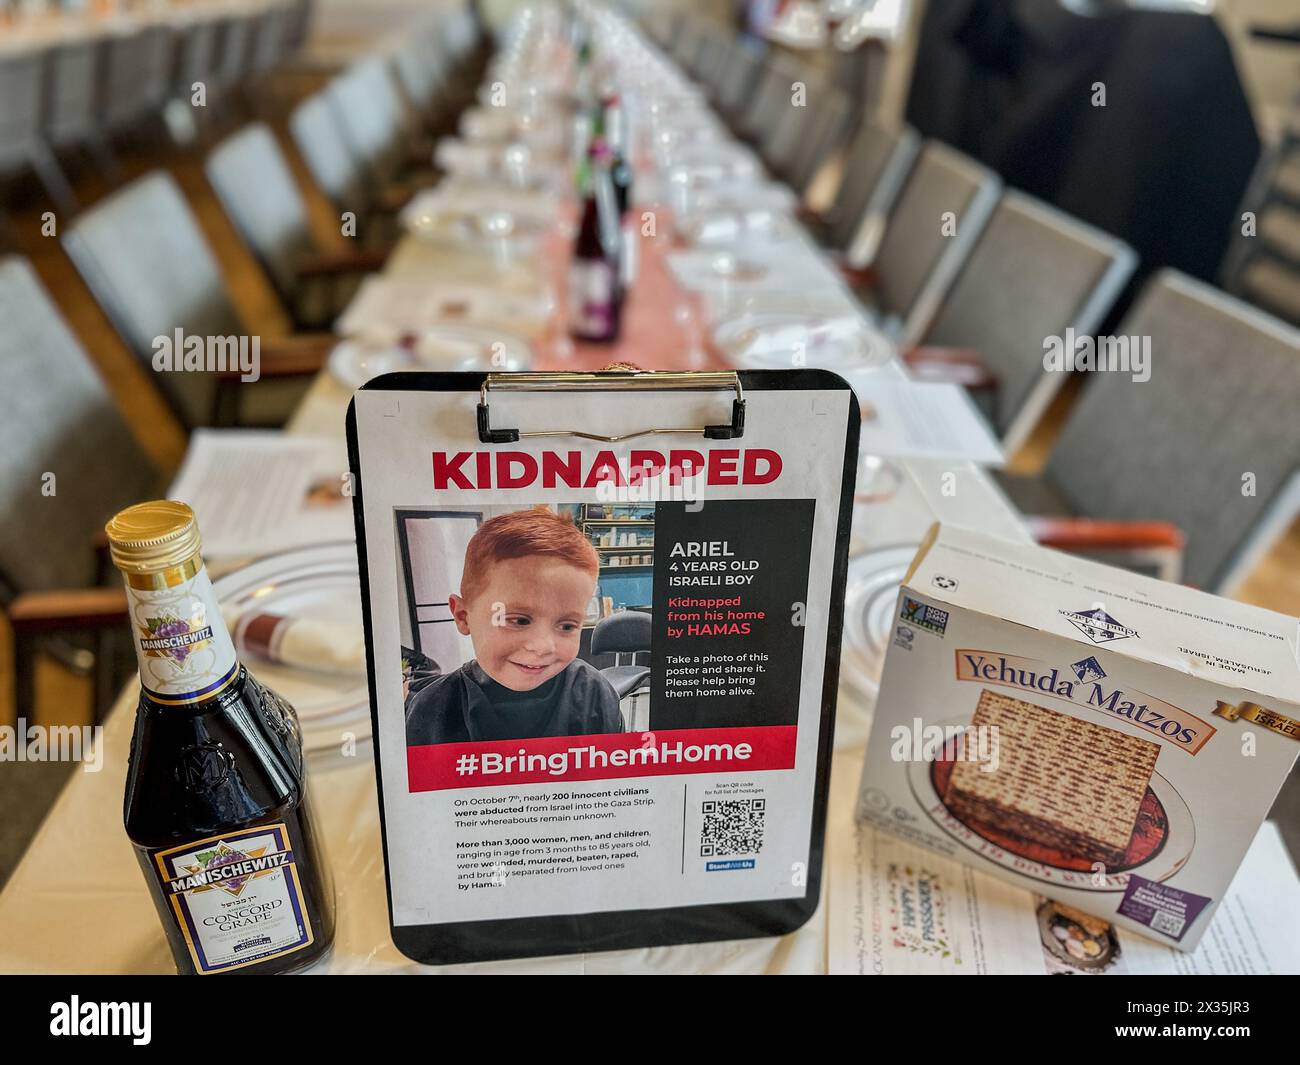 Montecito, California, U.S.A. 23rd Apr, 2024. A 'Kidnapped'' poster of Ariel, a four year old toddler kidnapped by Hamas, on a Passover table in Montecito, California, between a bottle of Kosher wine and a box of Matzos. This is hours before Jews will gather to celebrate Pesach ''” a ritual dinner where the story of how their ancestors in ancient times made the exodus from slavery in Egypt to freedom in Israel. The horrible attack by Hamas on Israel last fall and those hostages still being imprisoned in war-torn Palestine is a present day reminder of the bitterness of oppression, which is a Stock Photo